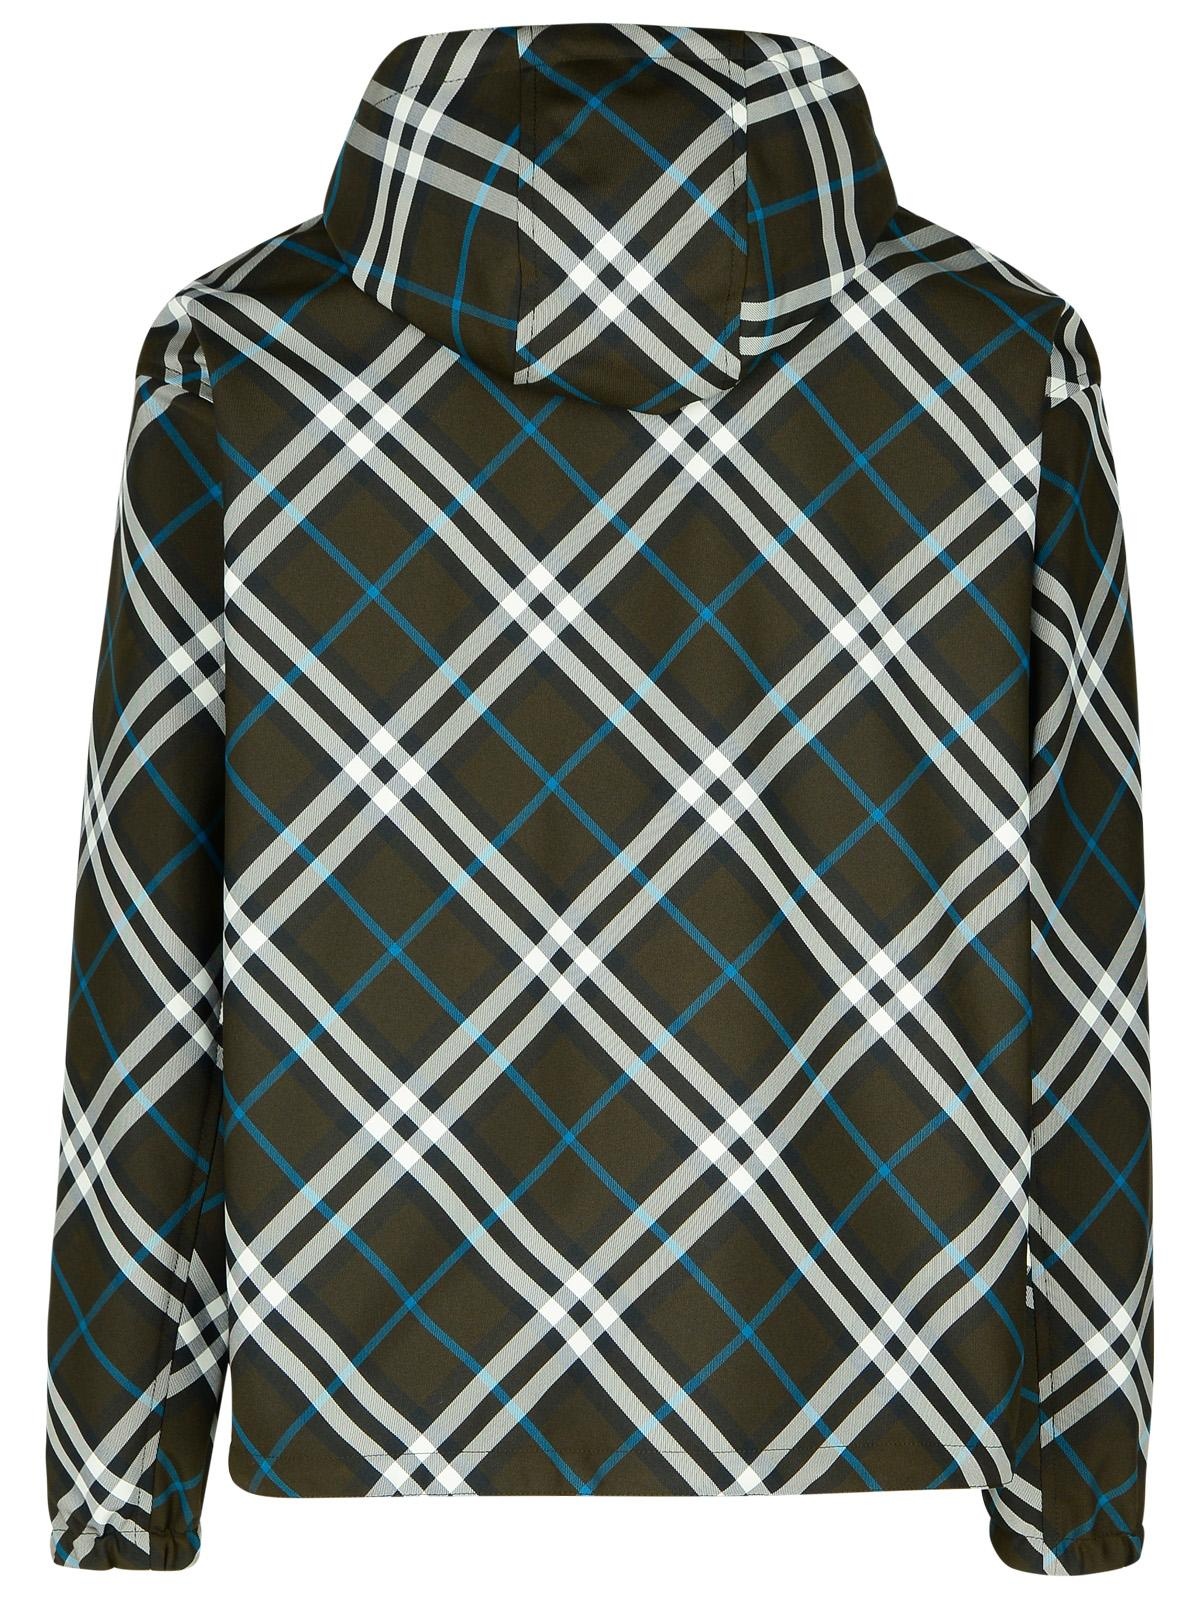 Burberry 'Check' Reversible Green Polyester Jacket - 3